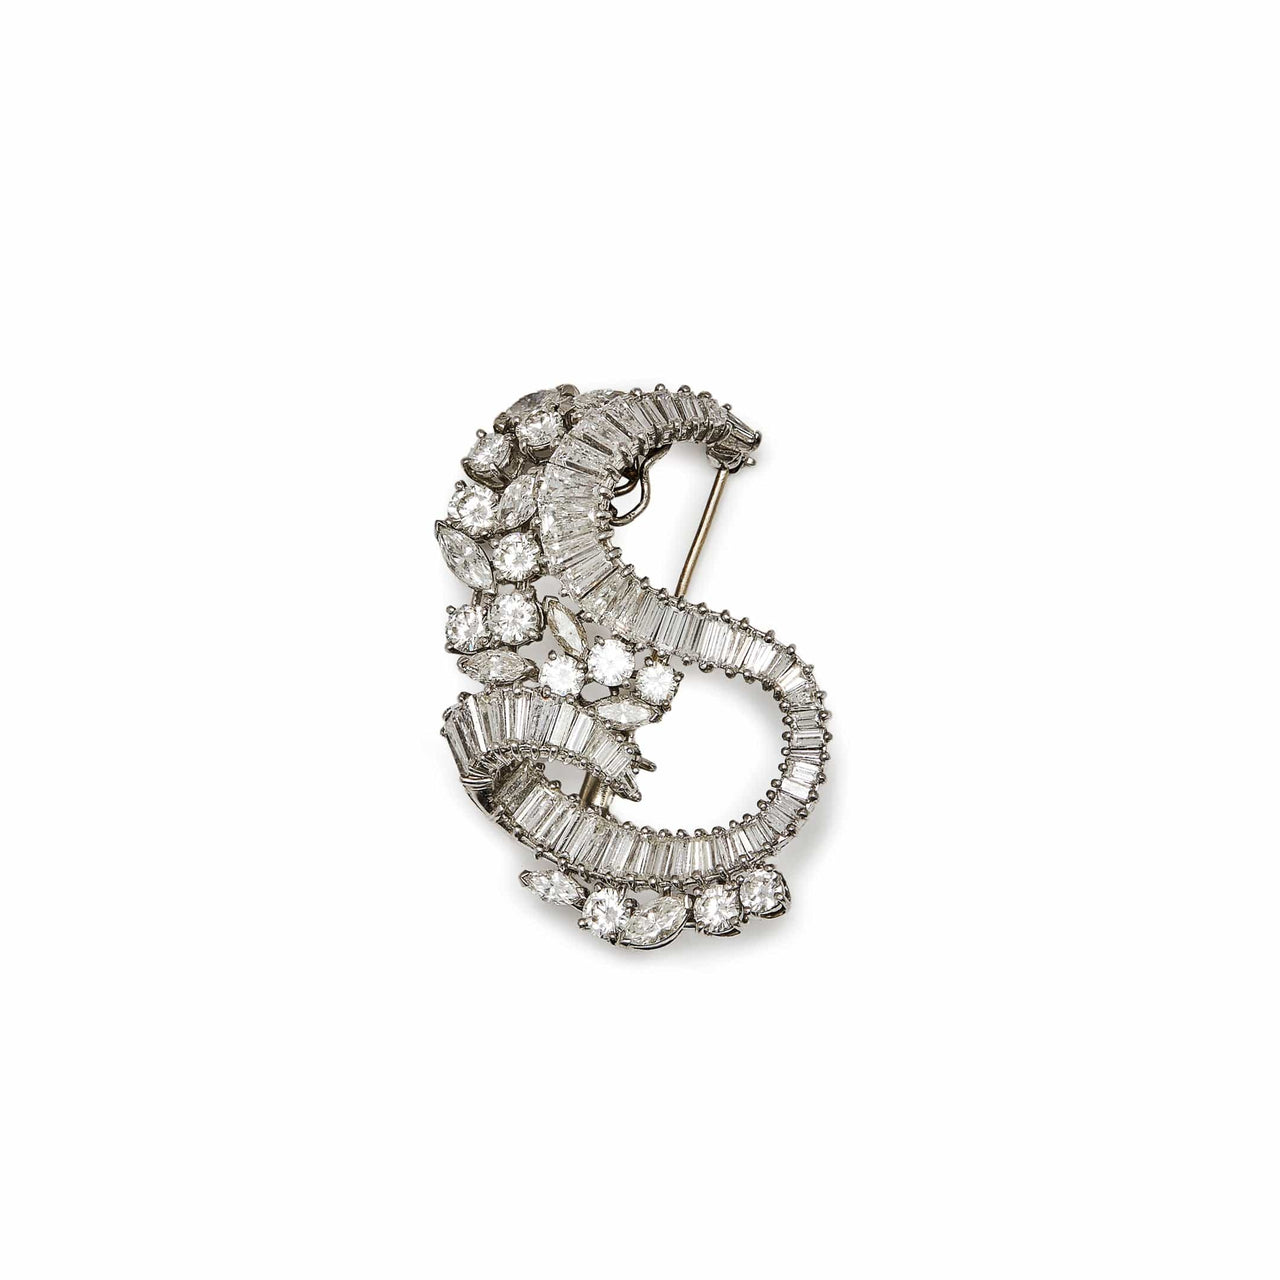 Vintage Brooch18-Karat White Gold  Round Diamonds, Marquise-Shaped Diamonds, and Tapered Baguette-Cut Diamonds